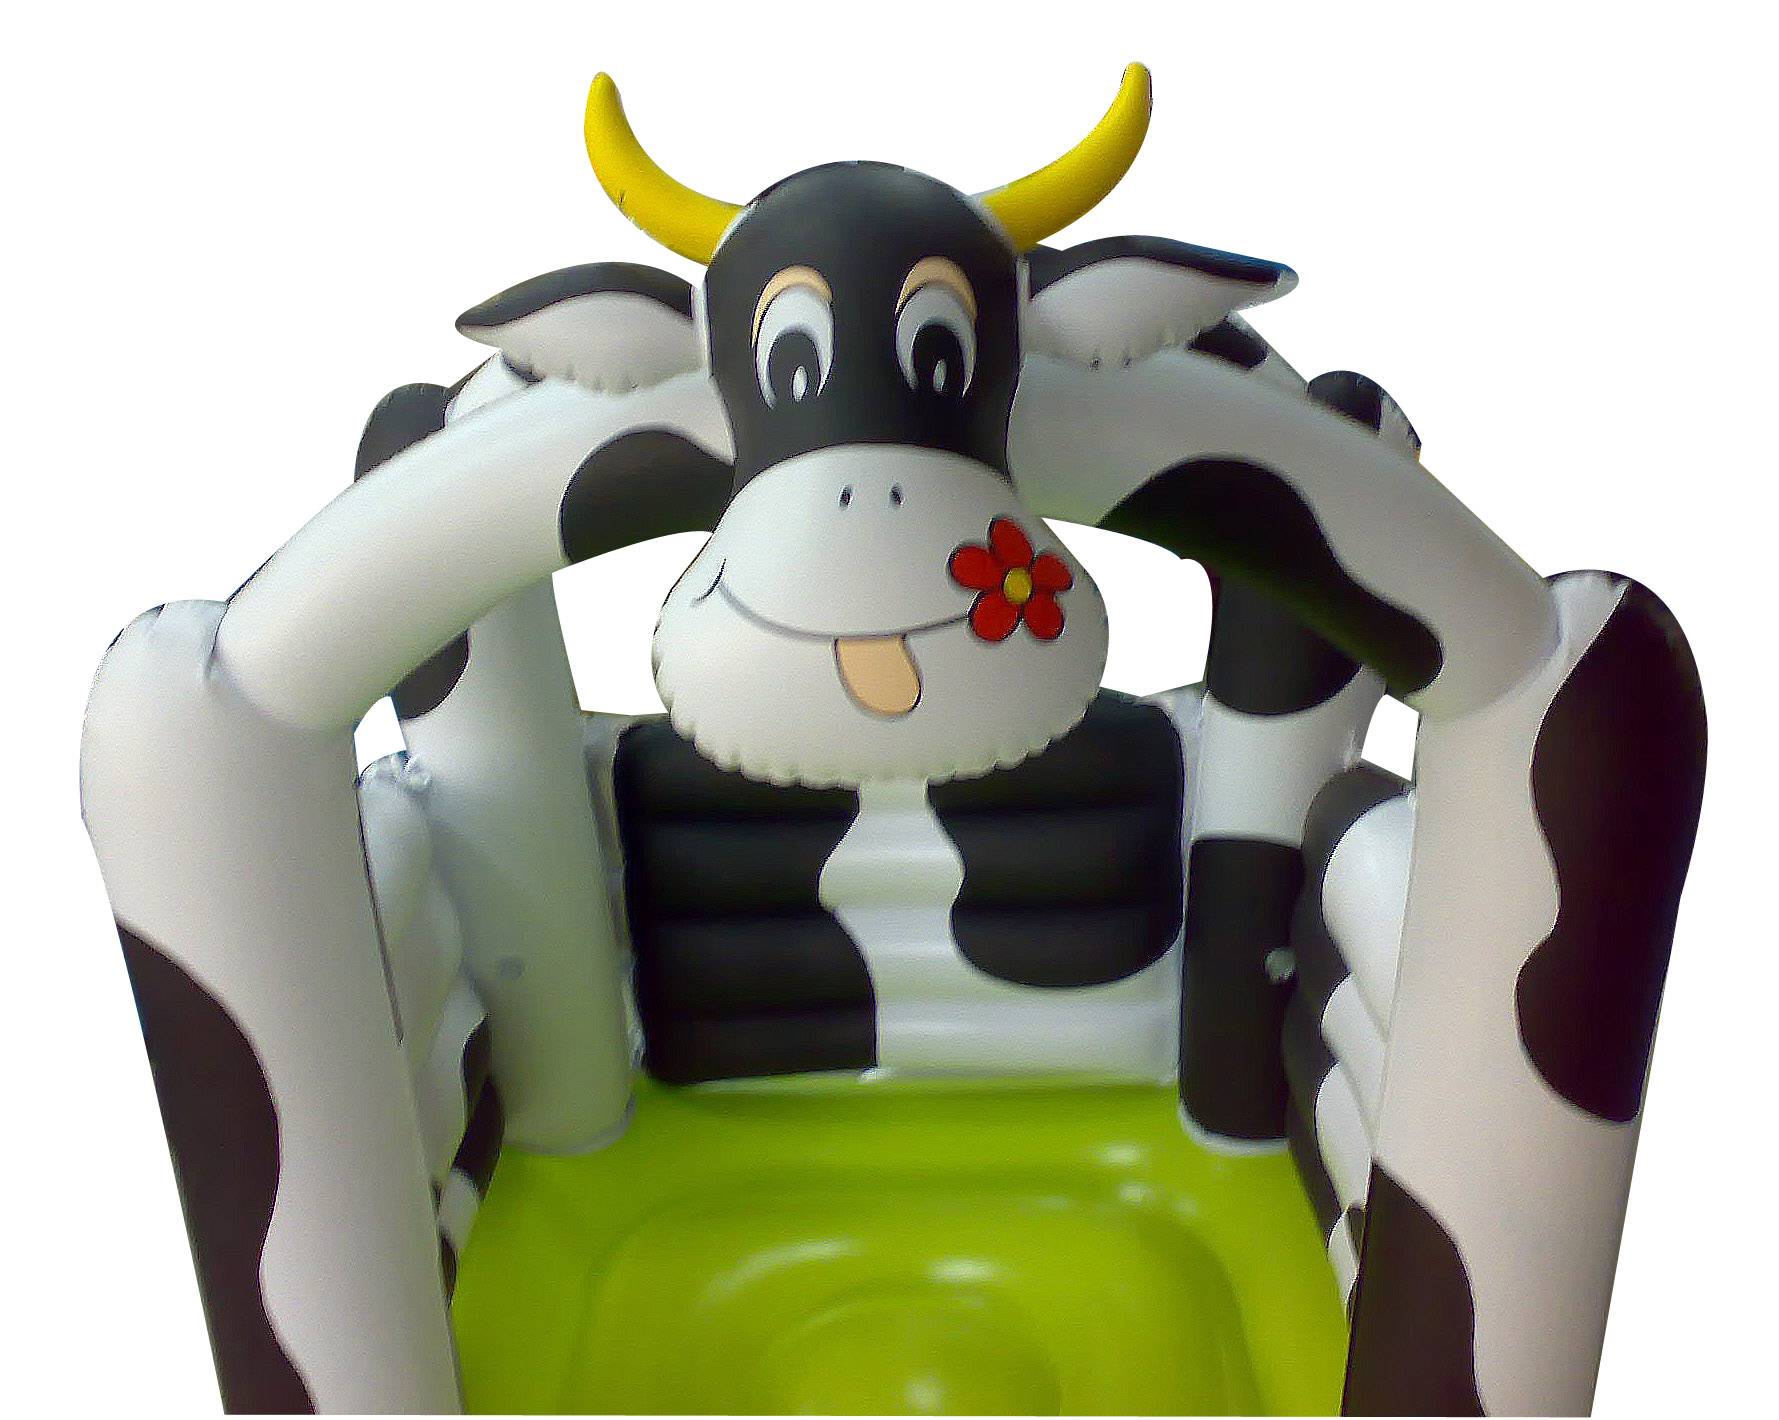 Customised  Combination Inflatable Cow Bouncer Sprinkling Kiddie Swimming Pool